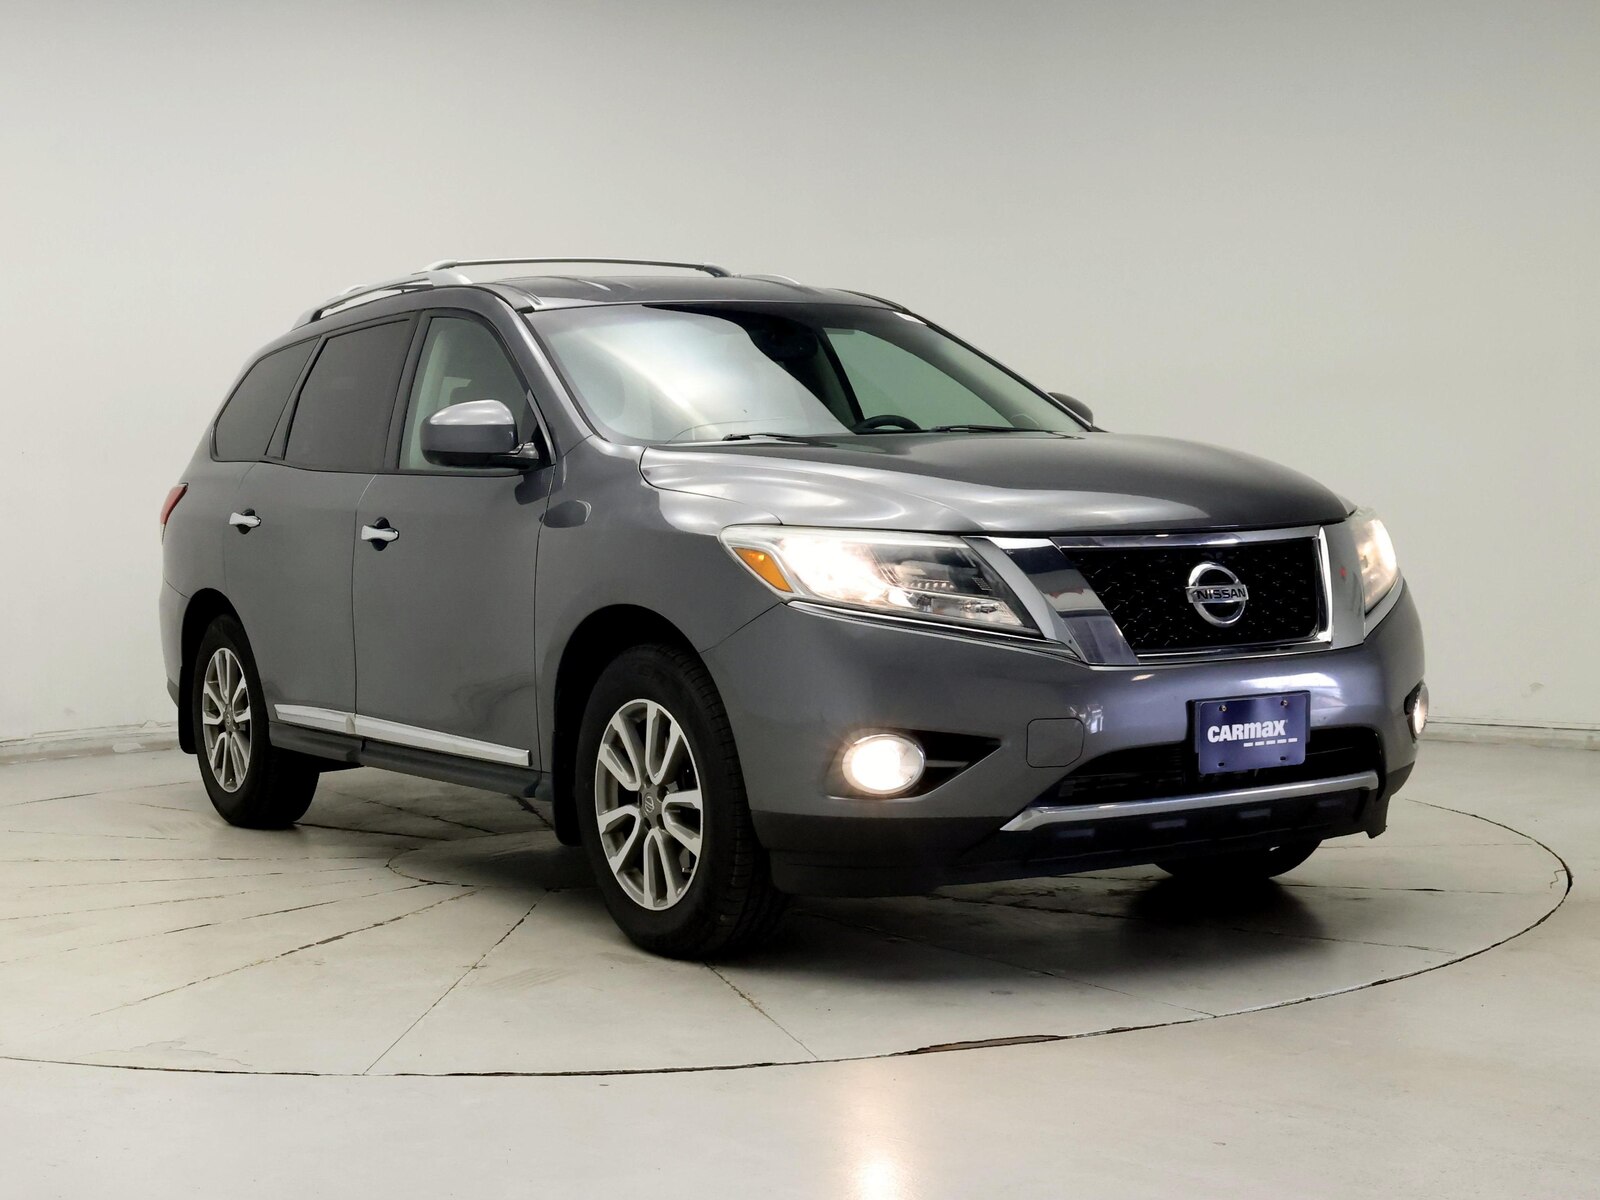 Used 2015 Nissan Pathfinder SL with VIN 5N1AR2MM7FC647940 for sale in Spokane Valley, WA